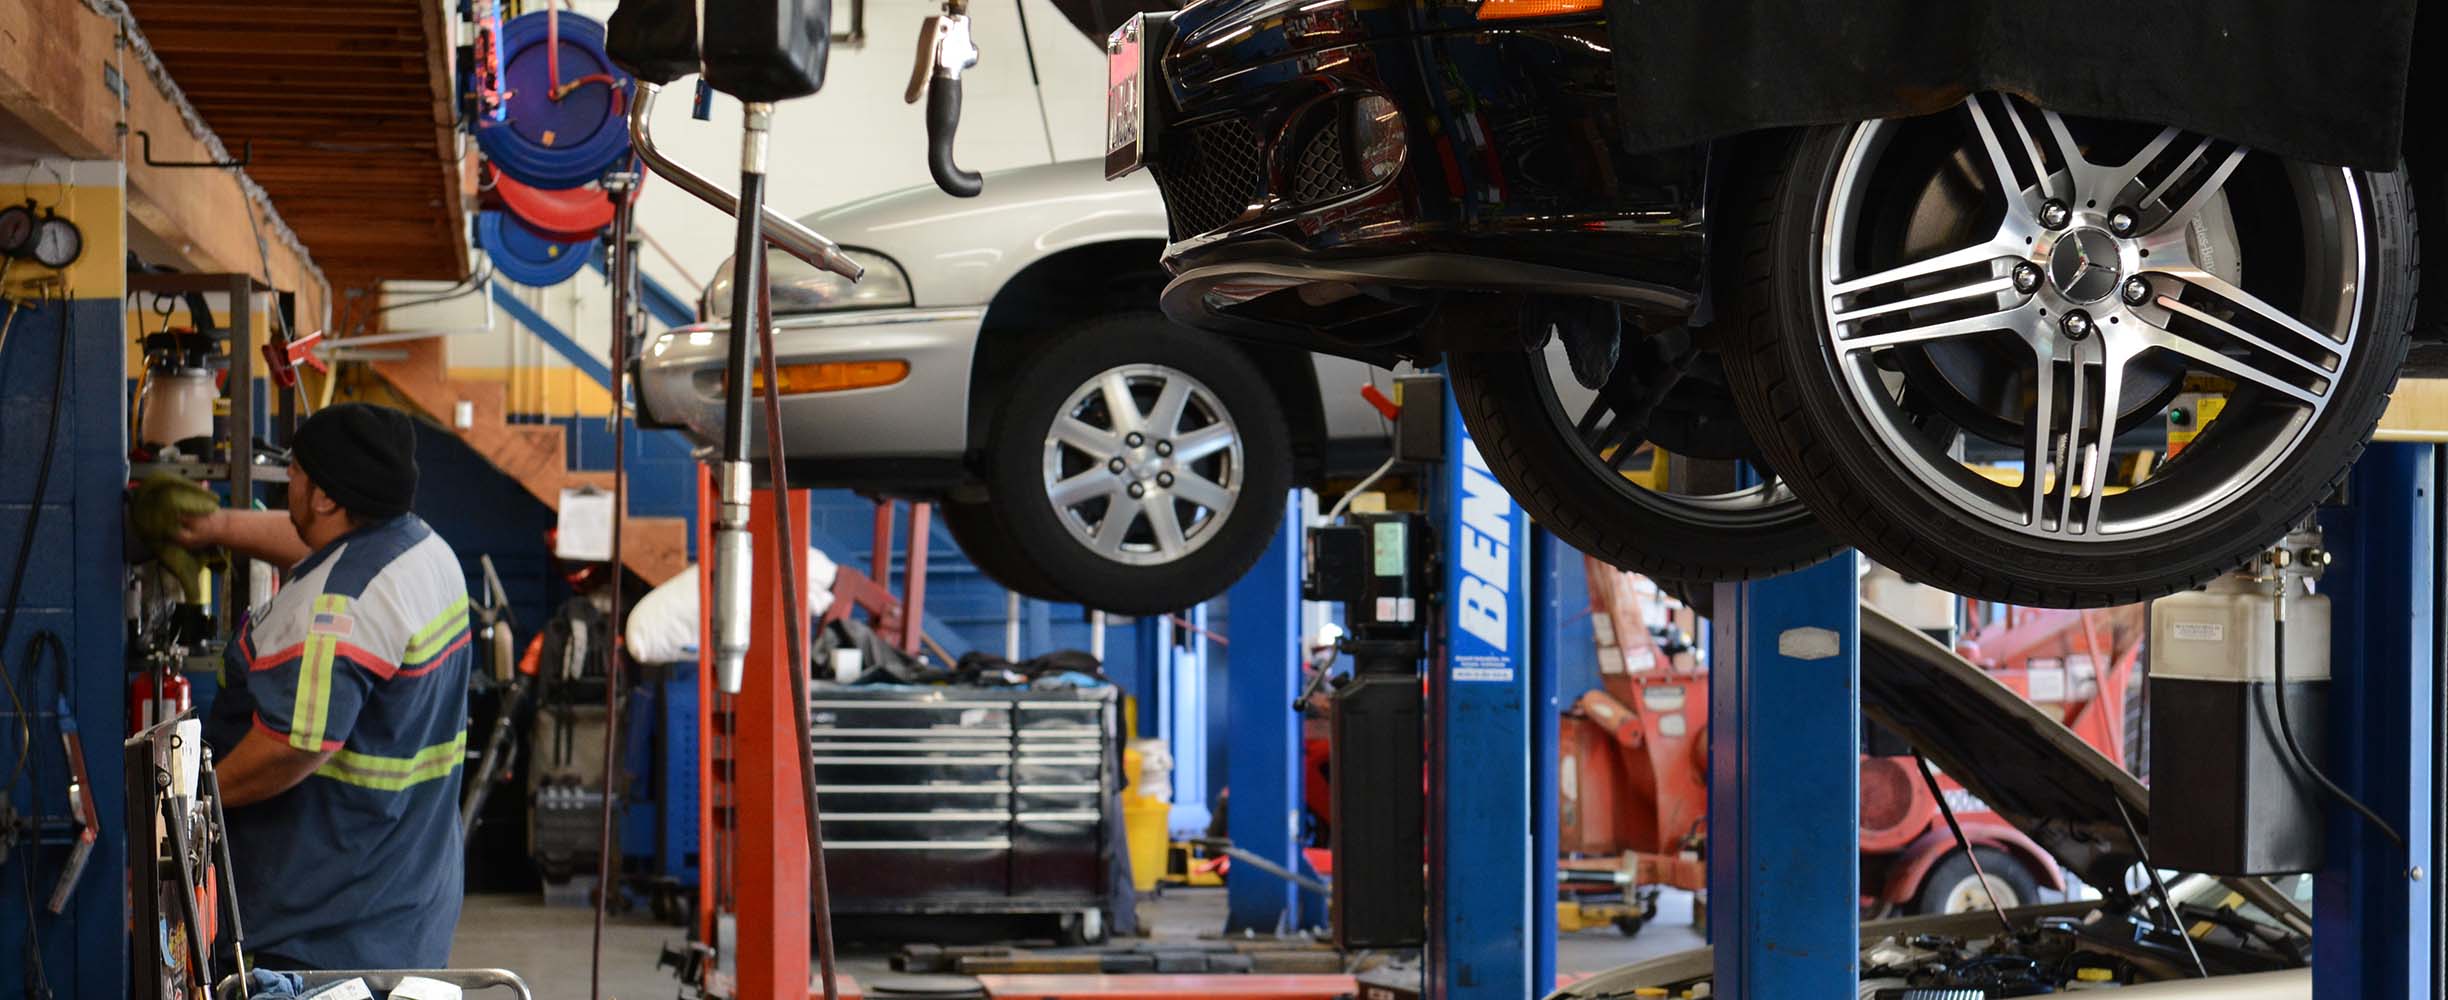 Auto repair shop with over 20 years of experience in Mountain View, California.